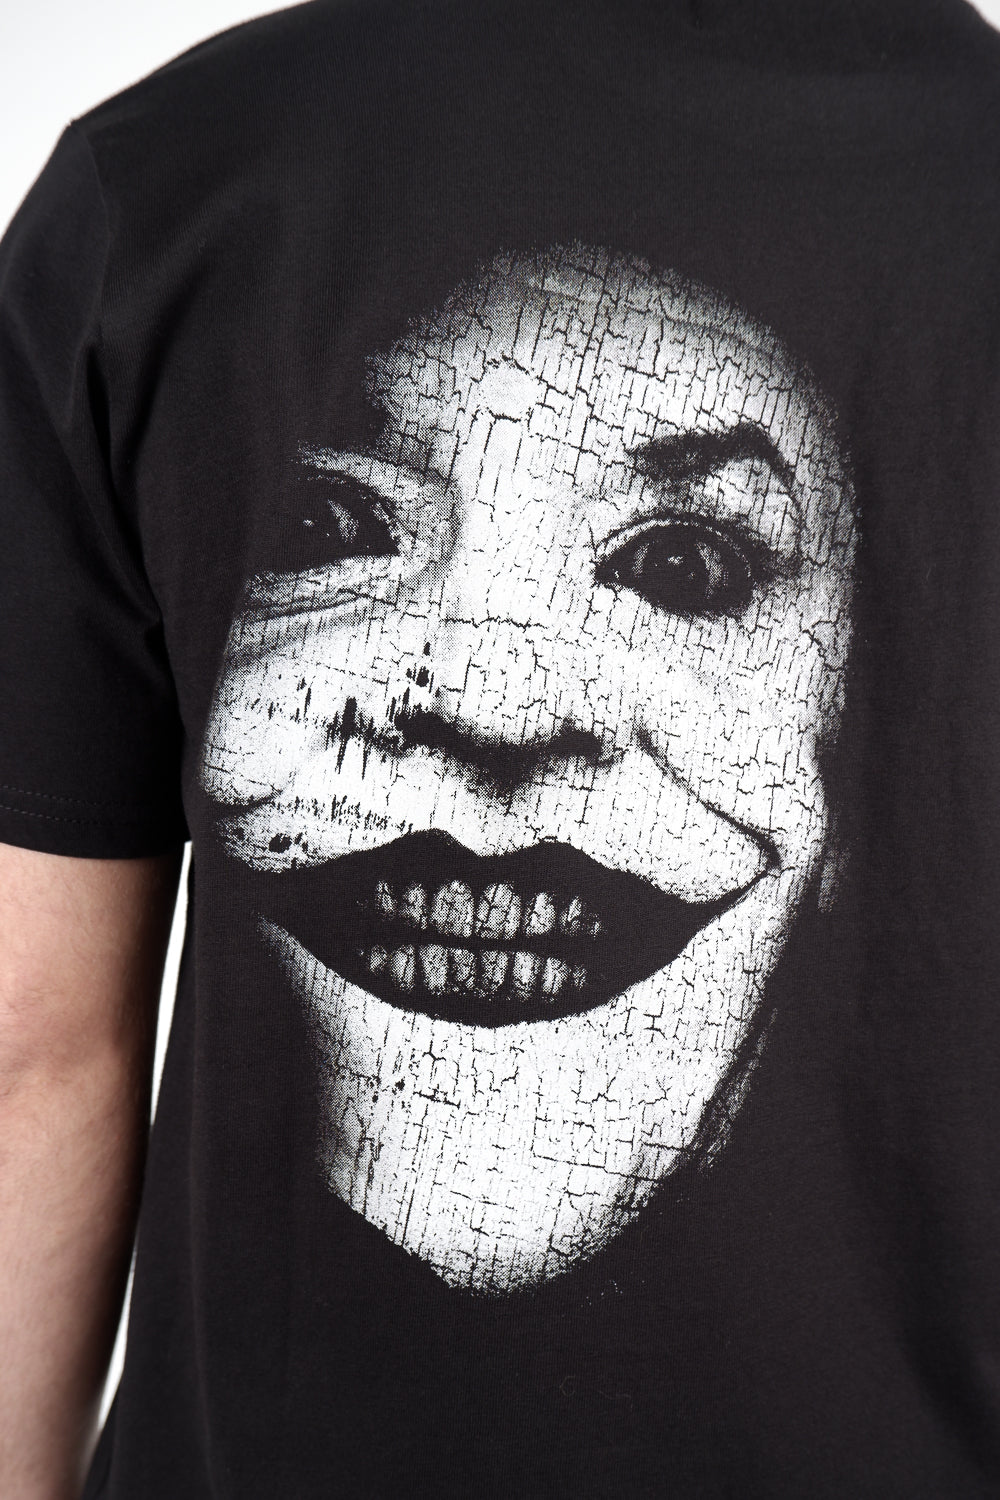 Buy the ABE Joker 2.0 T-Shirt Black at Intro. Spend £50 for free UK delivery. Official stockists. We ship worldwide.